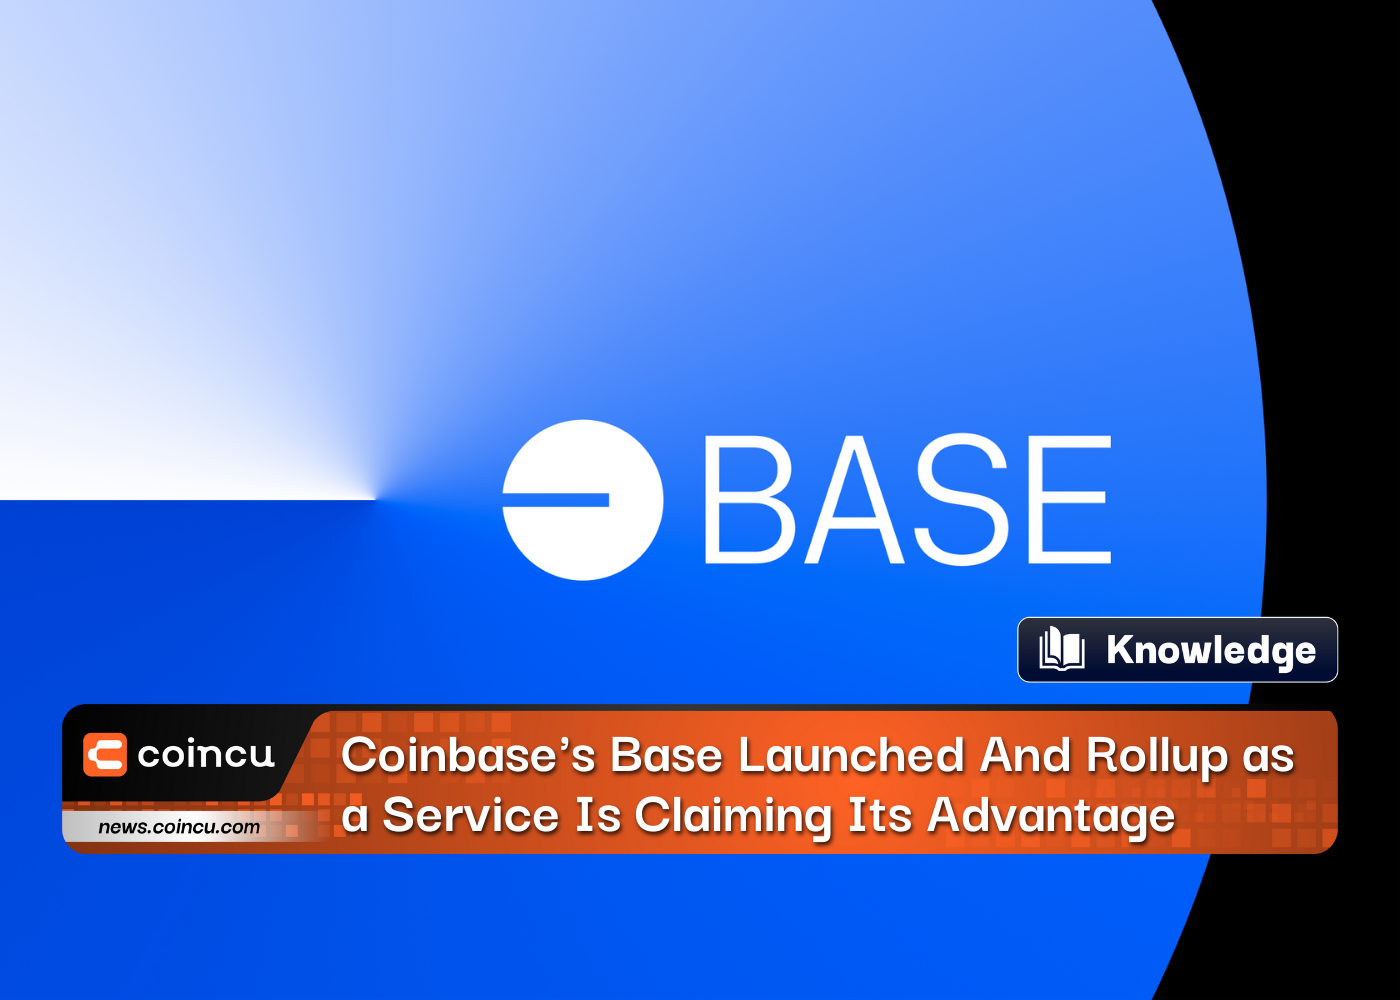 Coinbase's Base Launched And Rollup as a Service Is Claiming Its Advantage